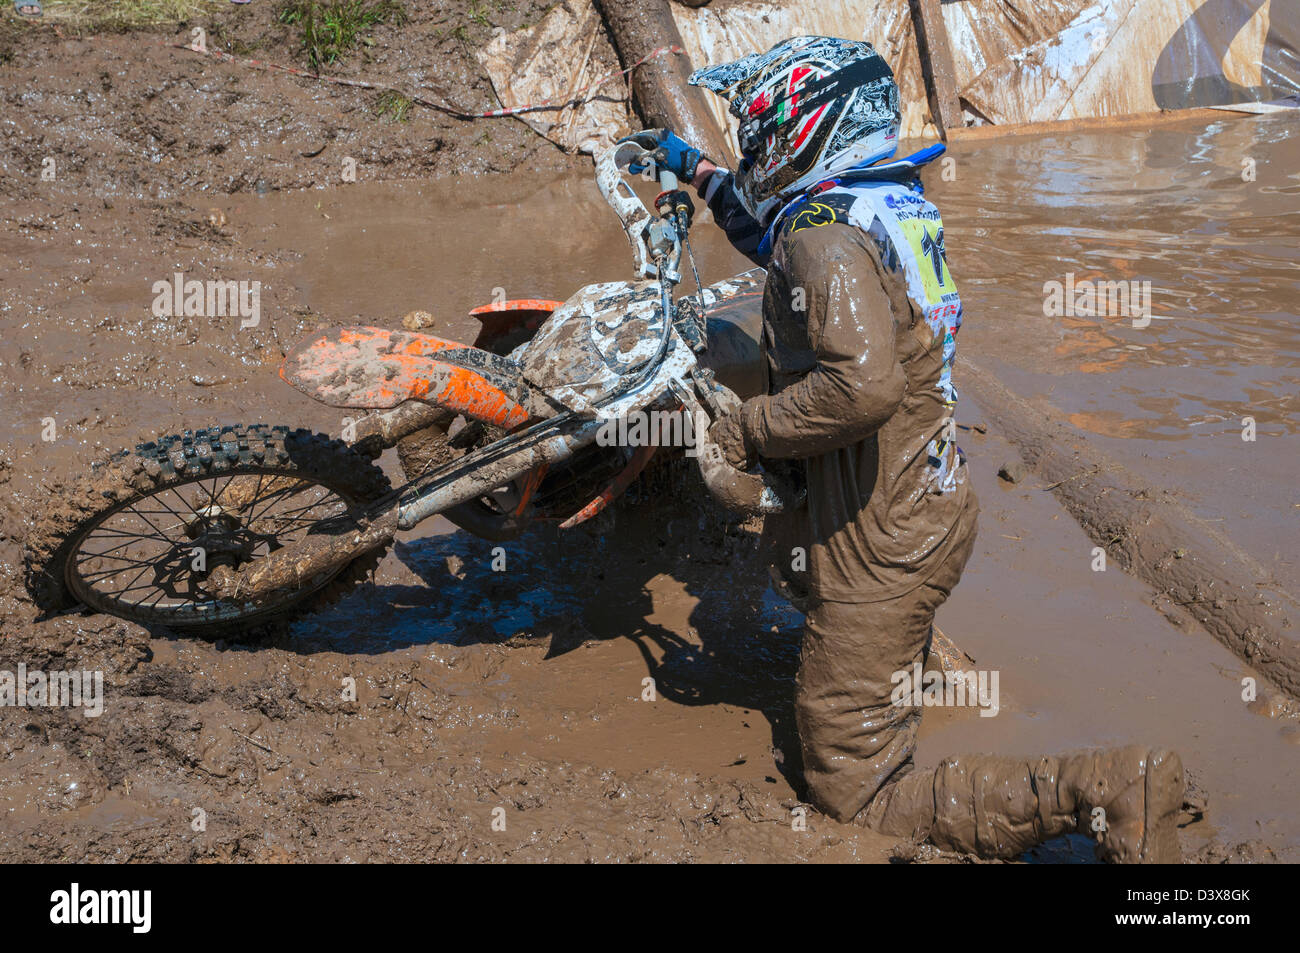 competition in motocross Stock Photo